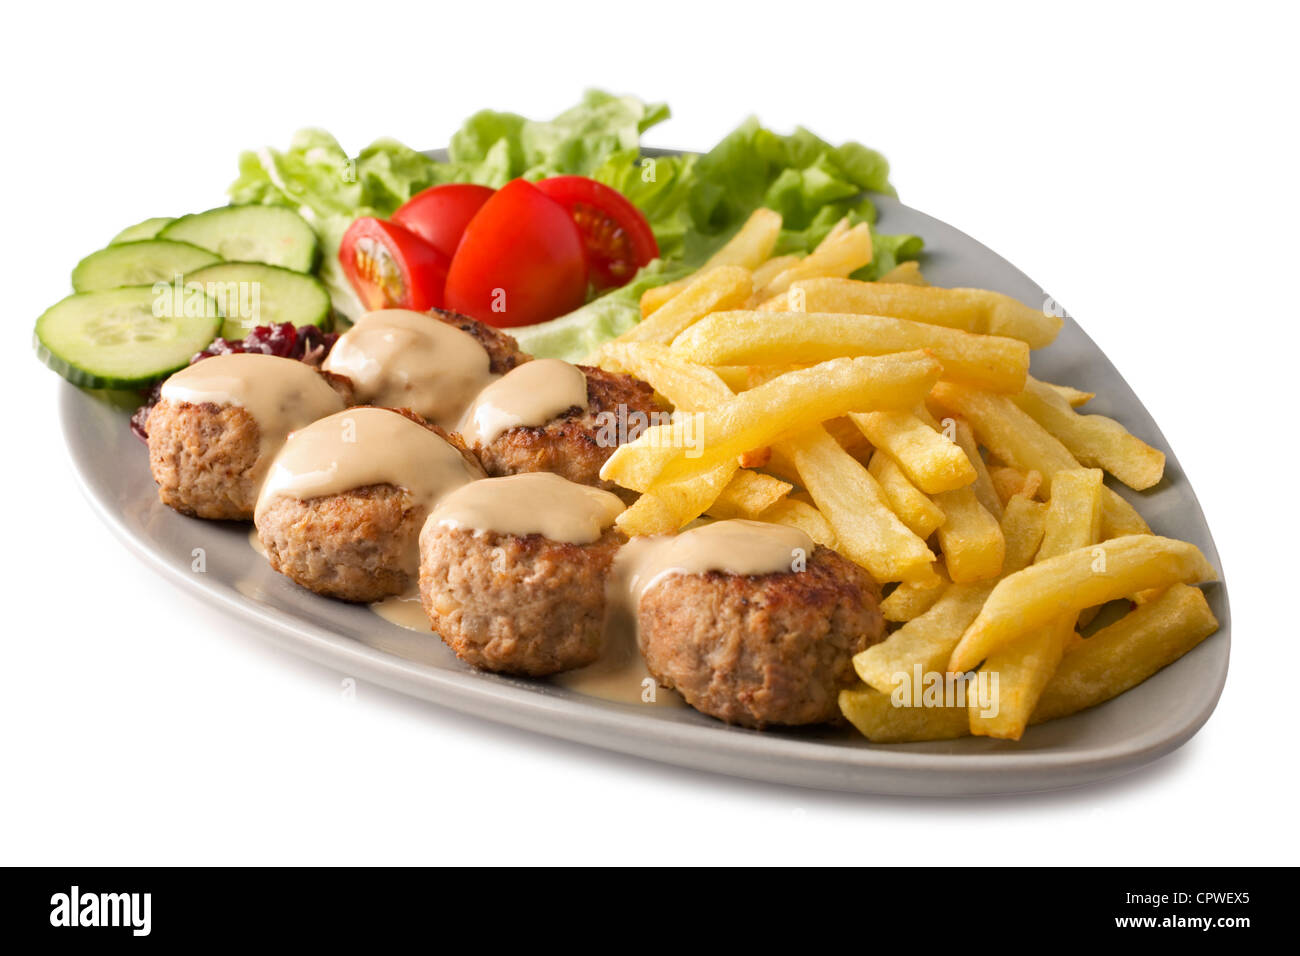 Generally thought of as the Swedish national dish, meatballs with ...